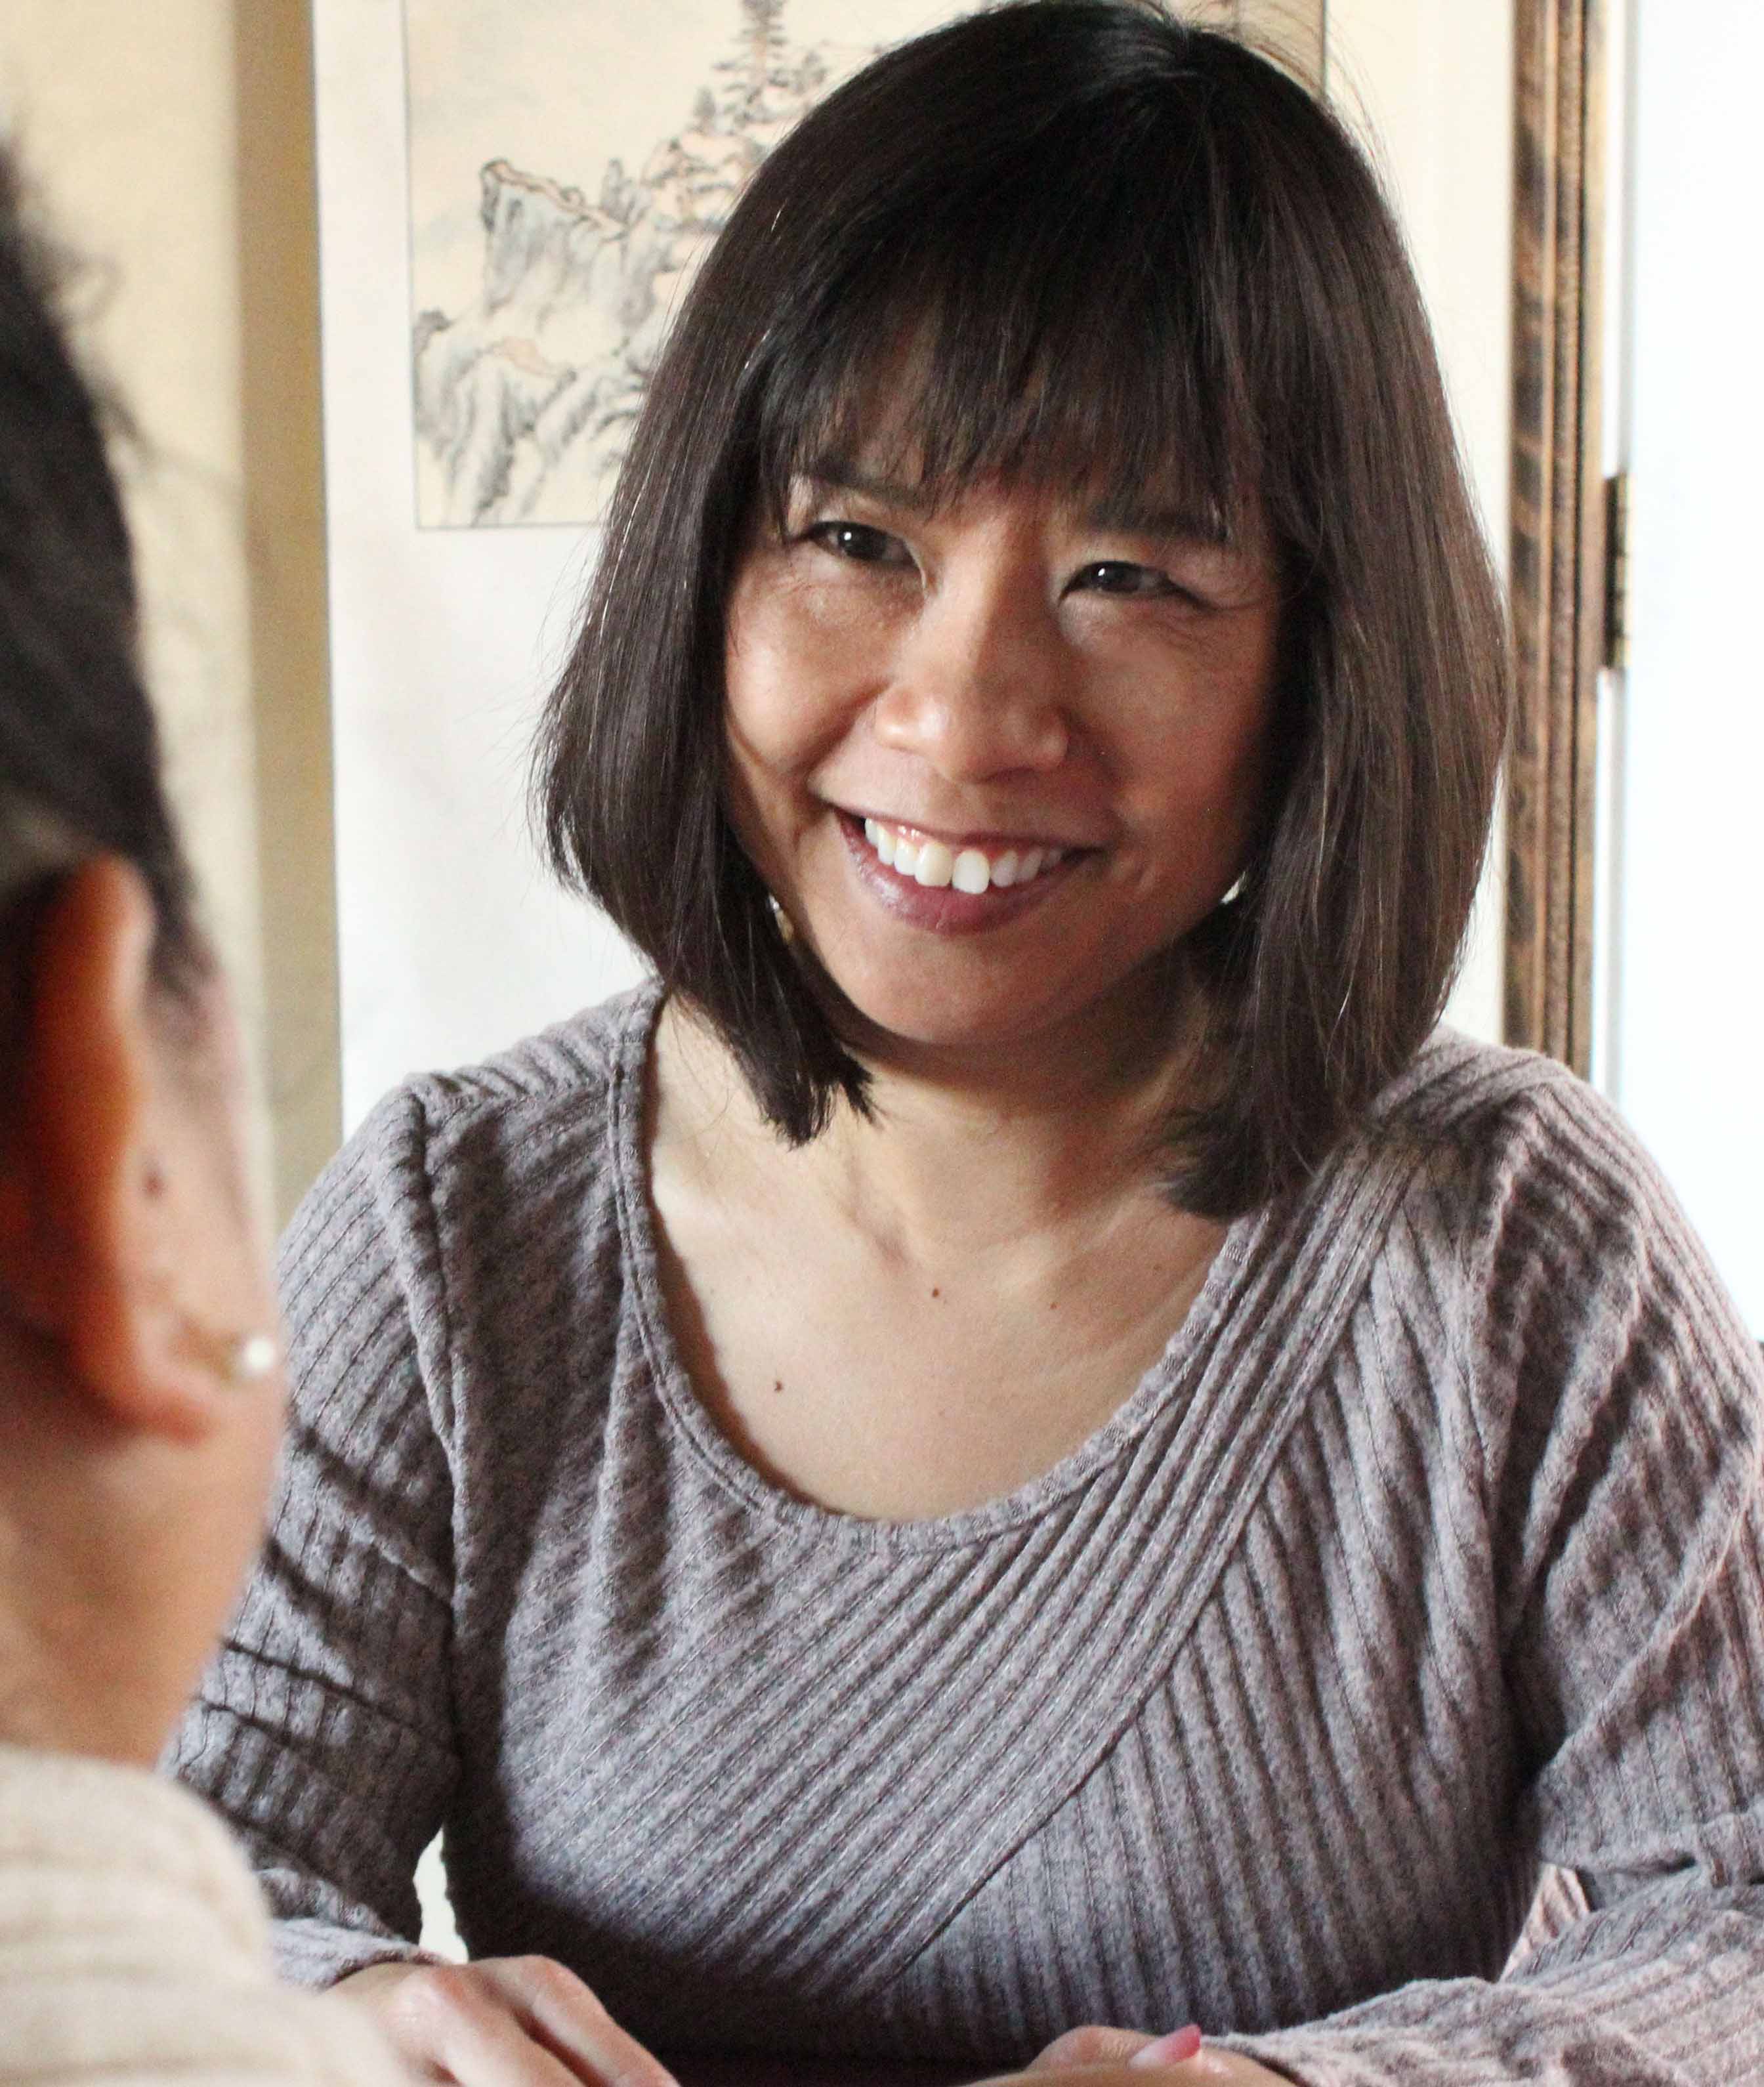 lynn cheng, acupuncturist in Fremont CA, sitting across a table with a patient and discussing her needs